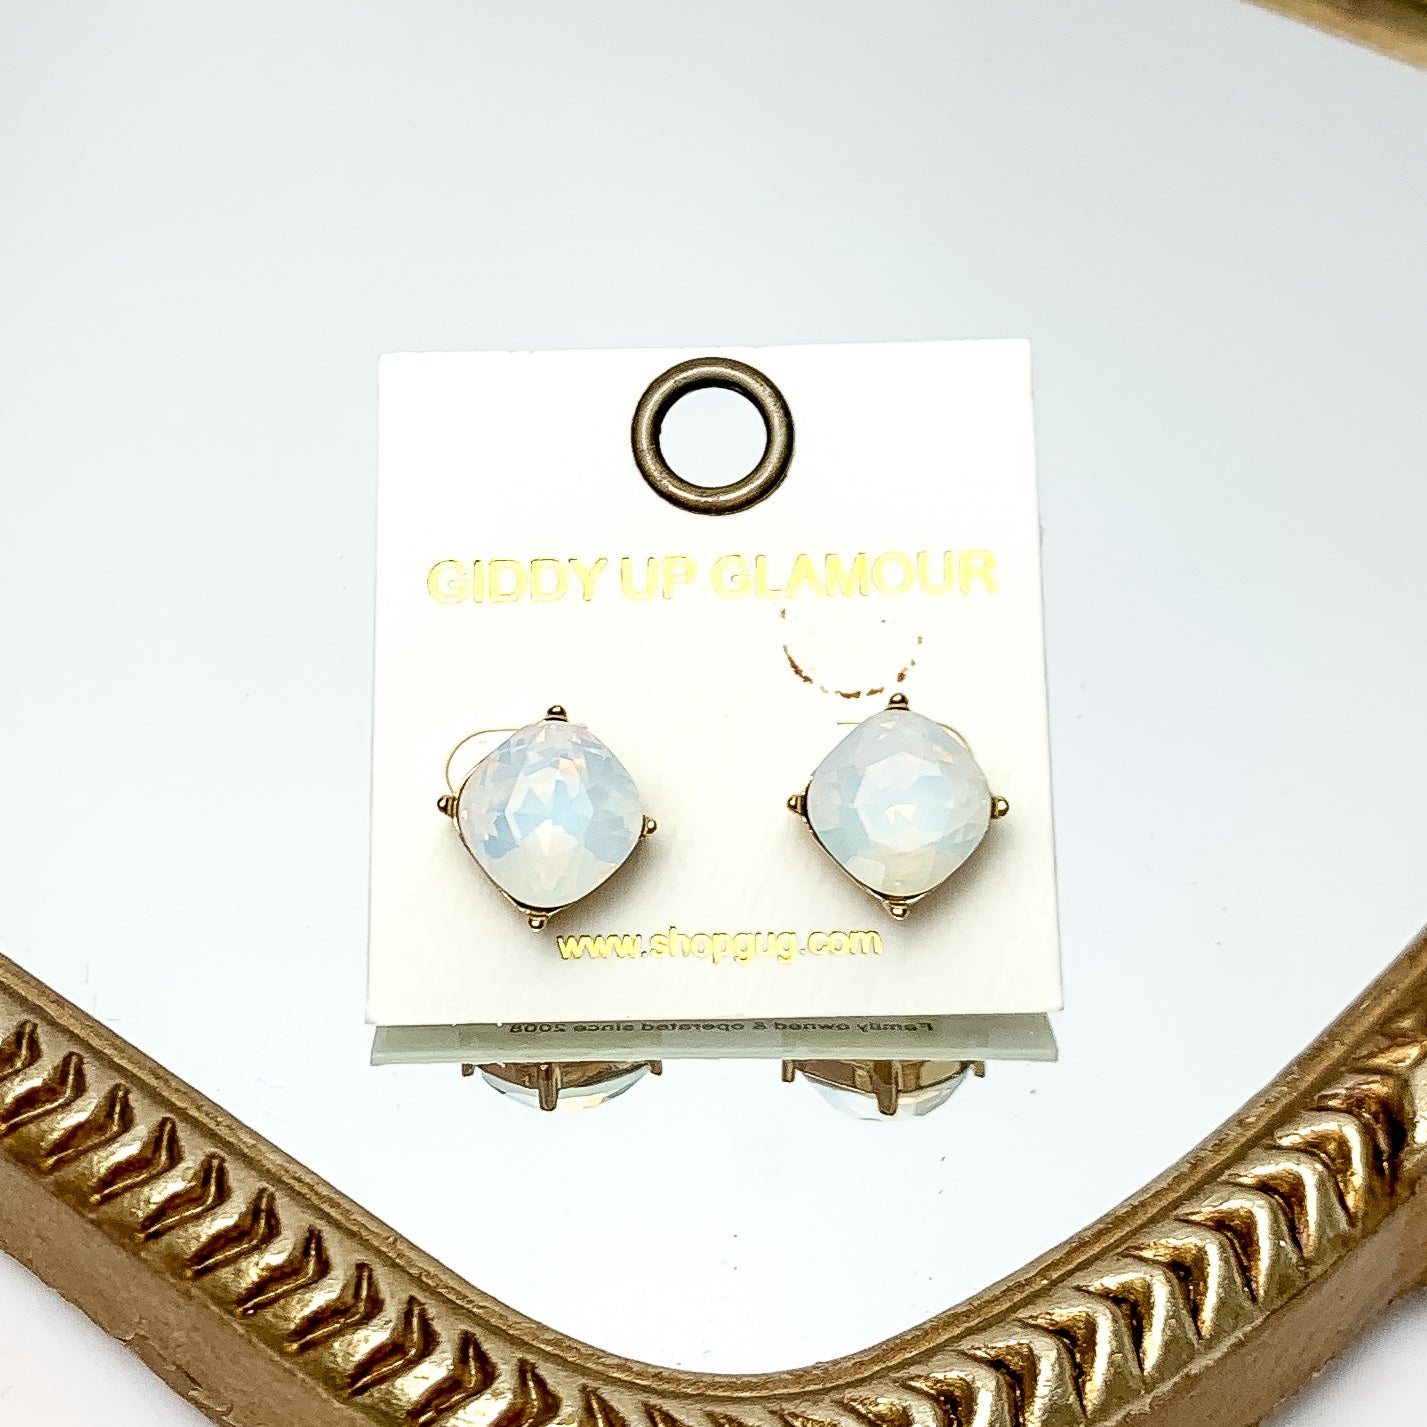 Large Crystal Stud Earrings in White Opal. These earrings are pictured laying on a gold trimmed mirror.